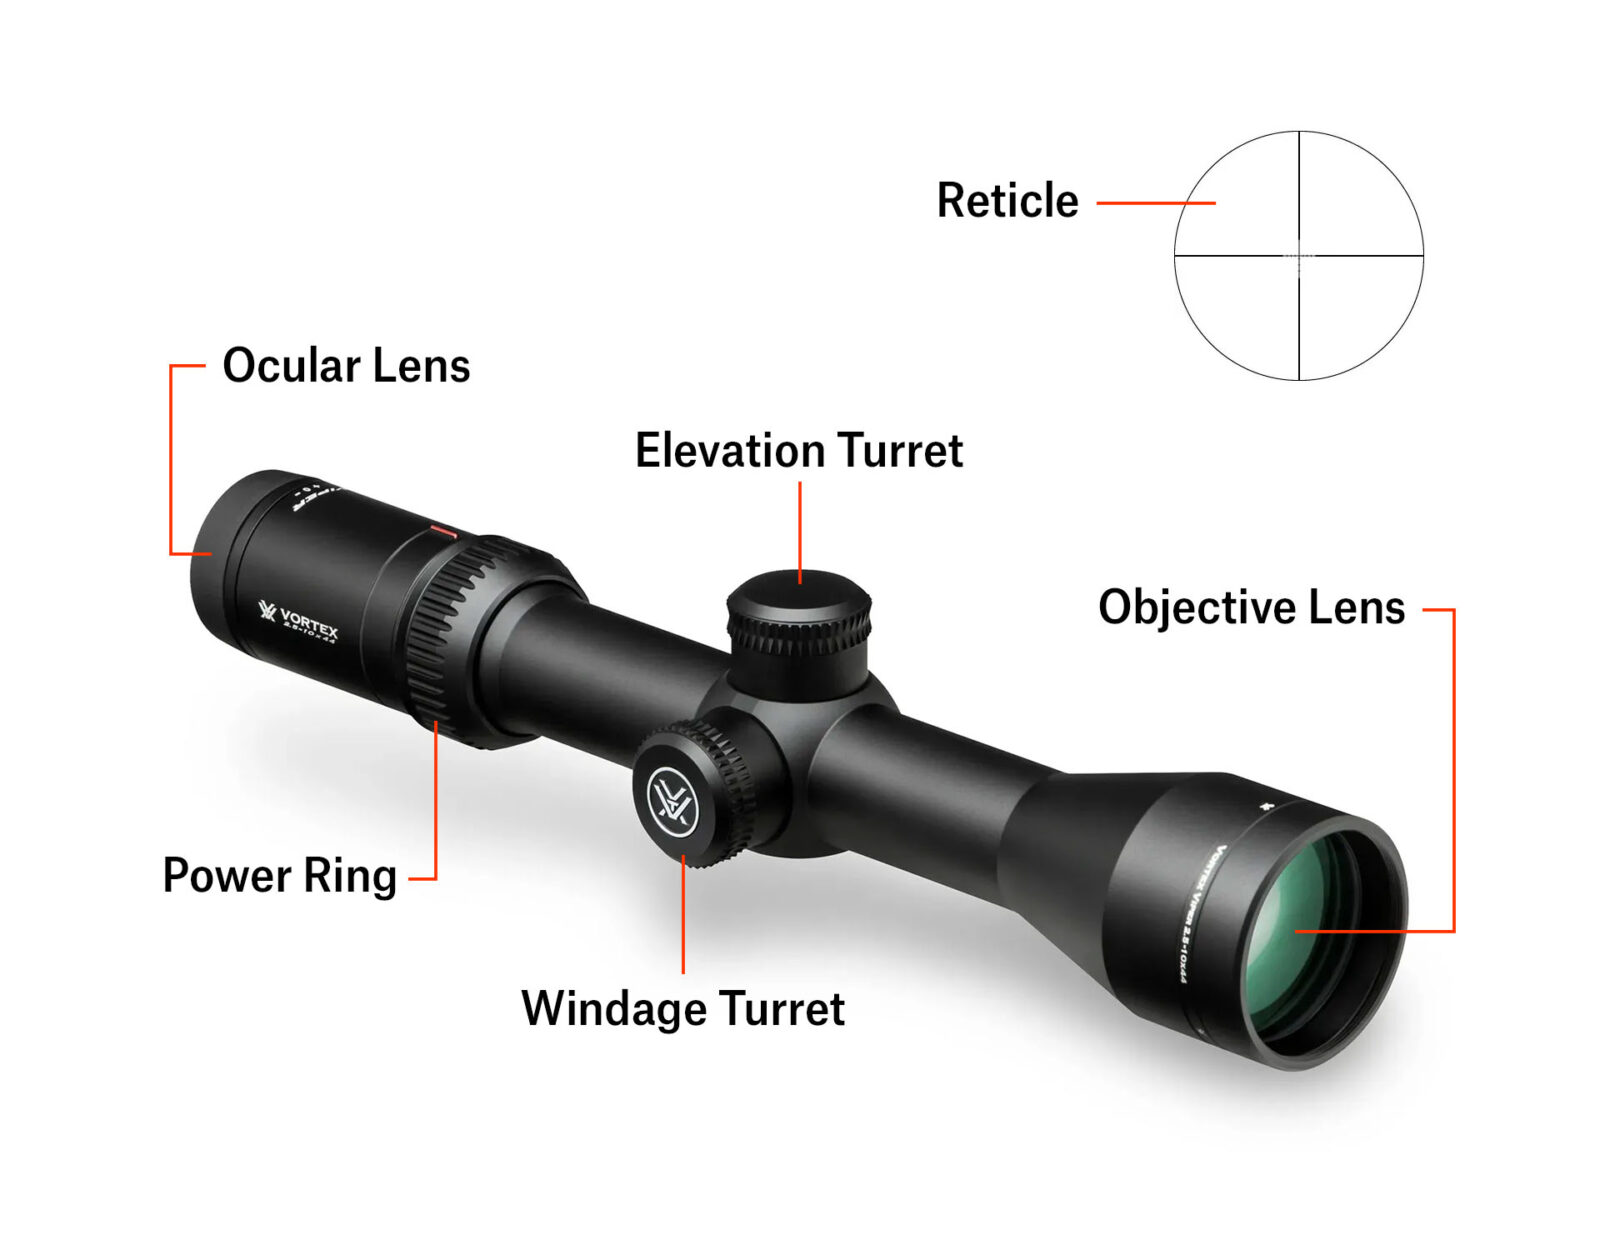 Parts of a riflescope with descriptions 